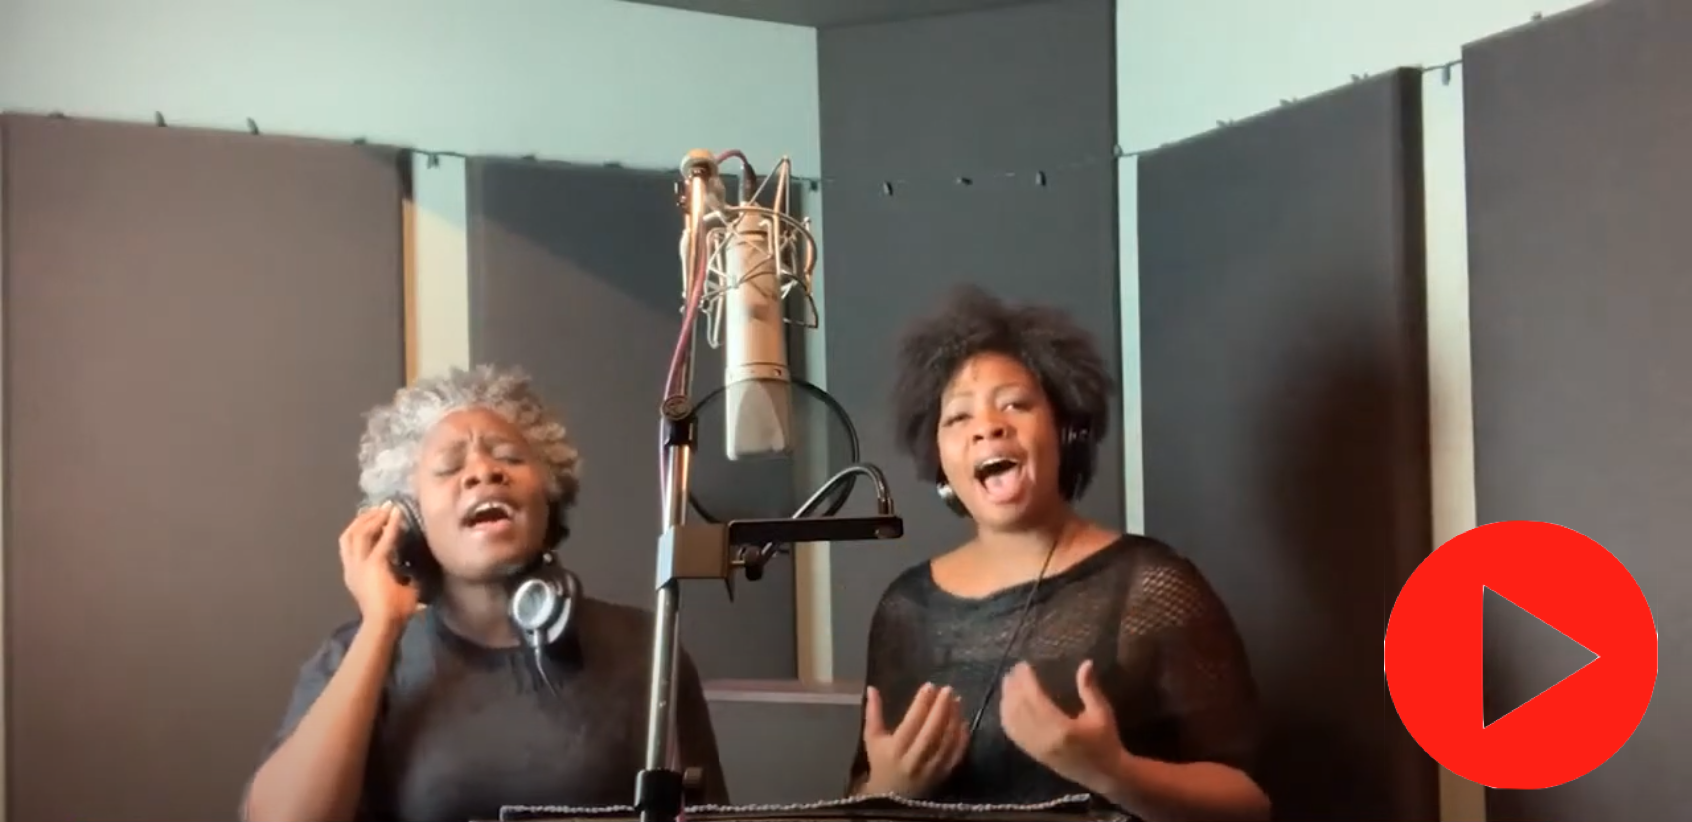 Two women (Spirit of Grace) in black shirts sing in front of a studio microphone in a room with soundproof padding on the walls.